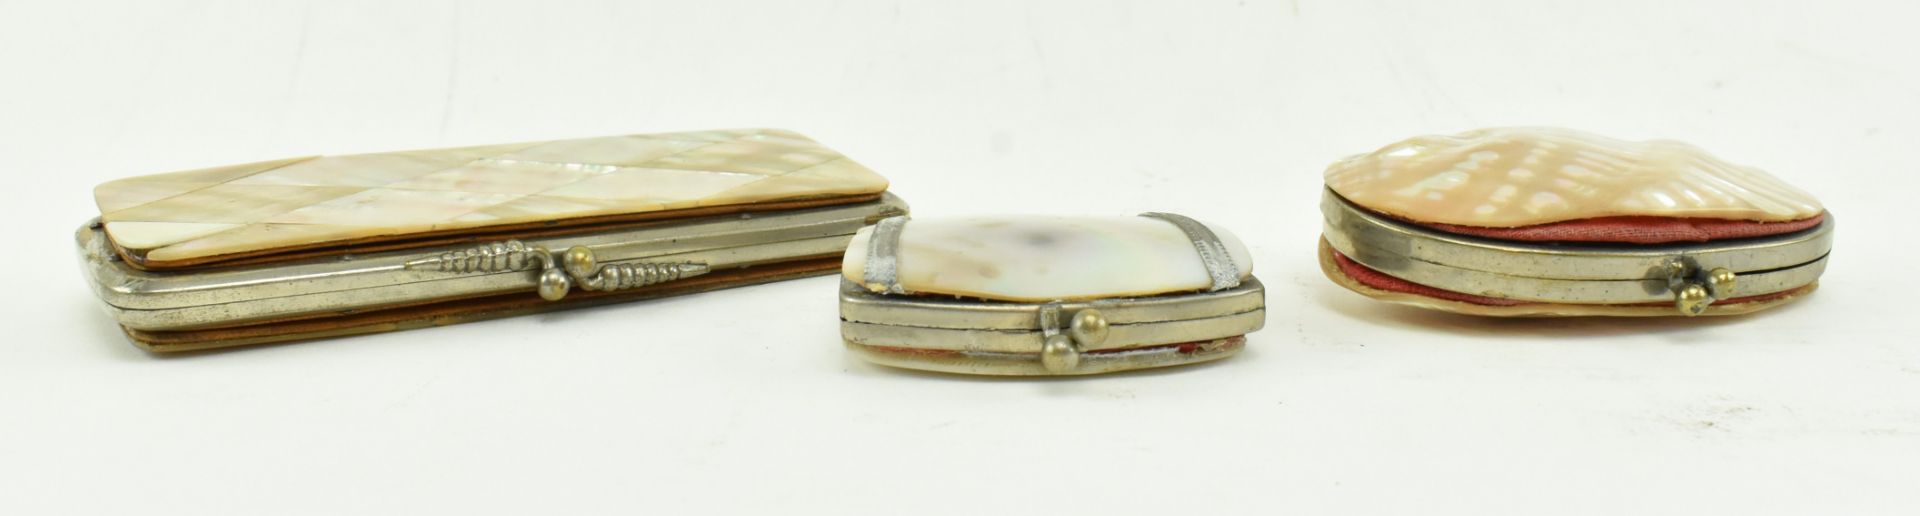 SEVEN MOTHER OF PEARL DECORATIVE TRINKET CASES - Image 8 of 9